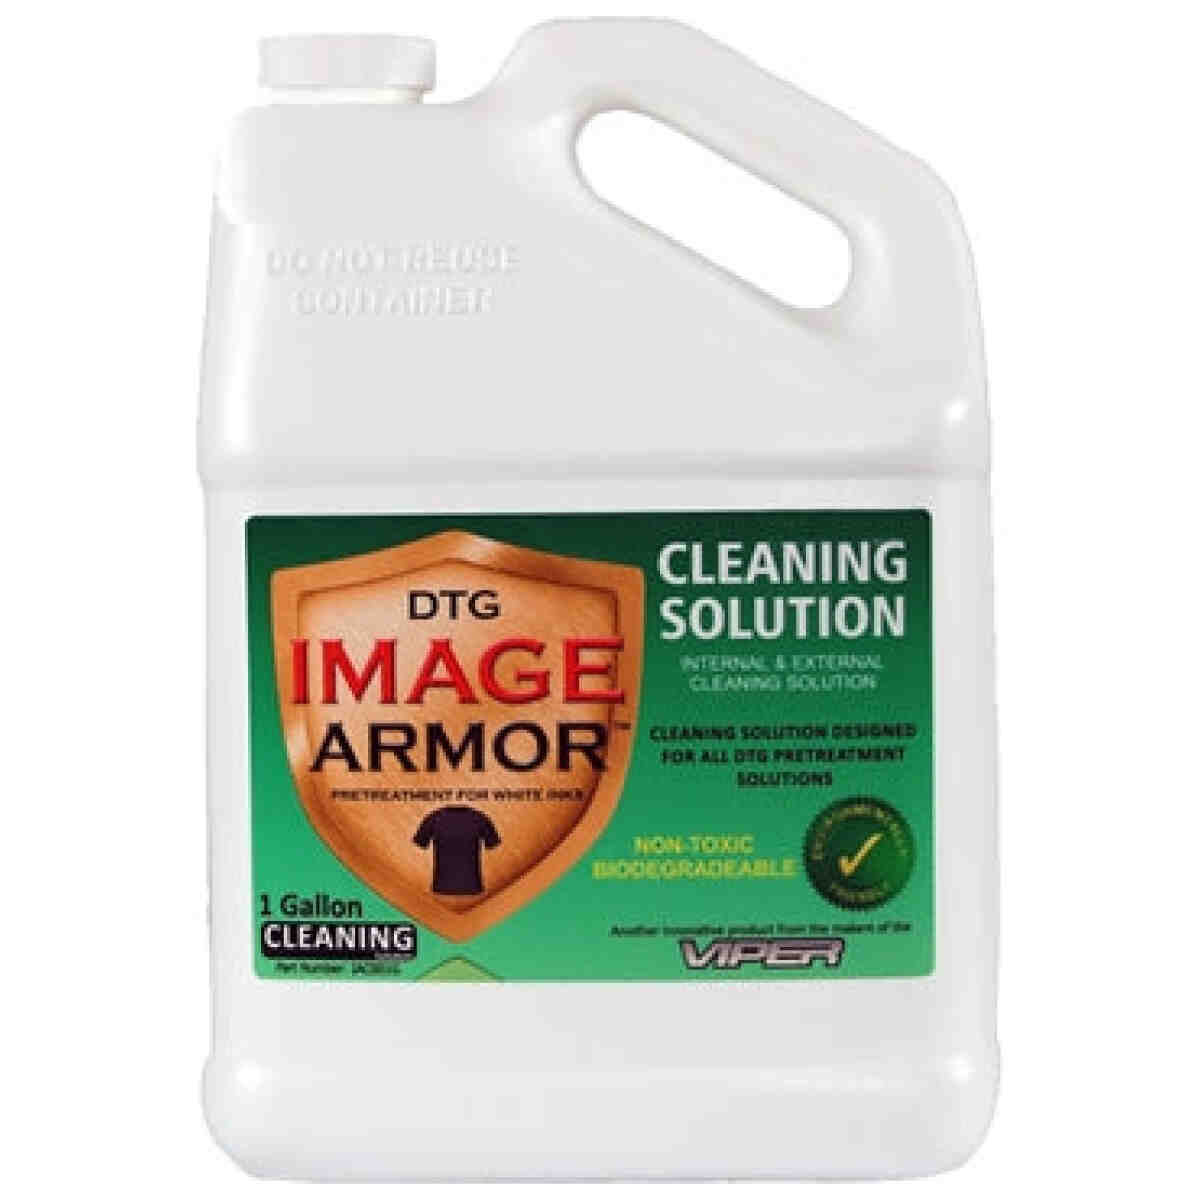 Image Armor DTG Pretreatment Cleaning Solution Green IMAGE ARMOR®